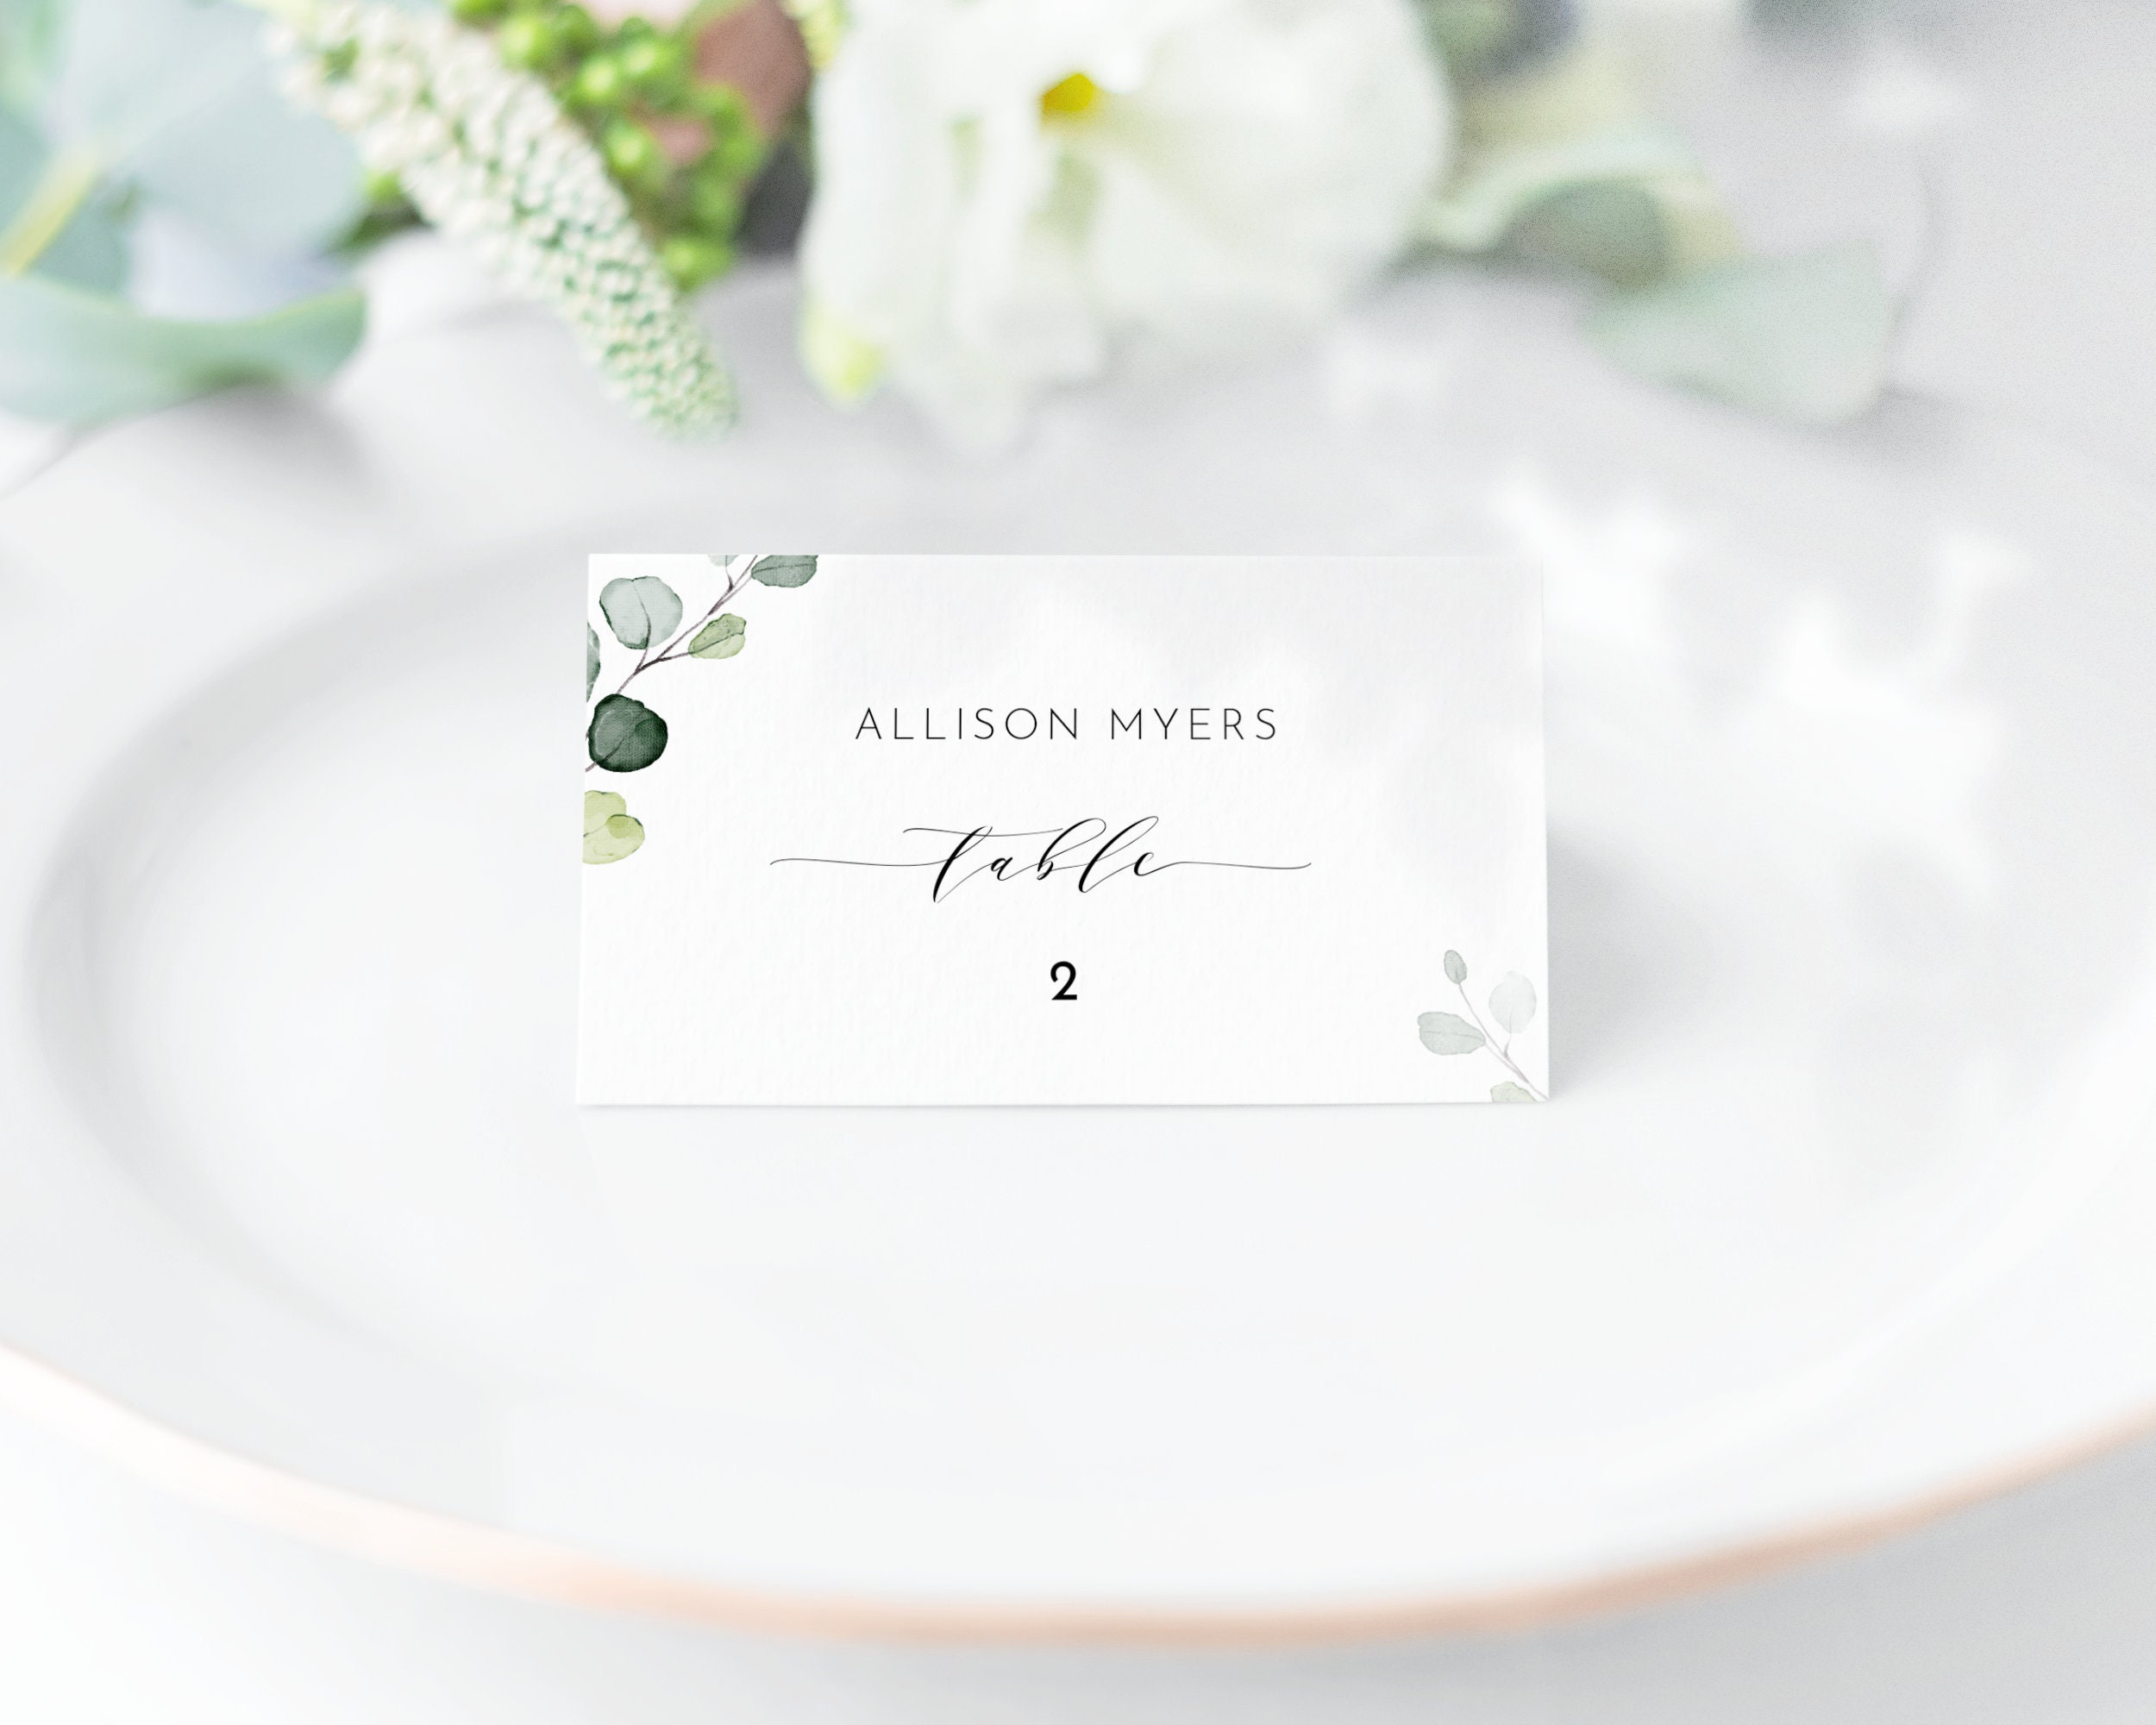 Guest Names Place Settings Wedding Names Eucalyptus Wedding Place Cards Name Cards